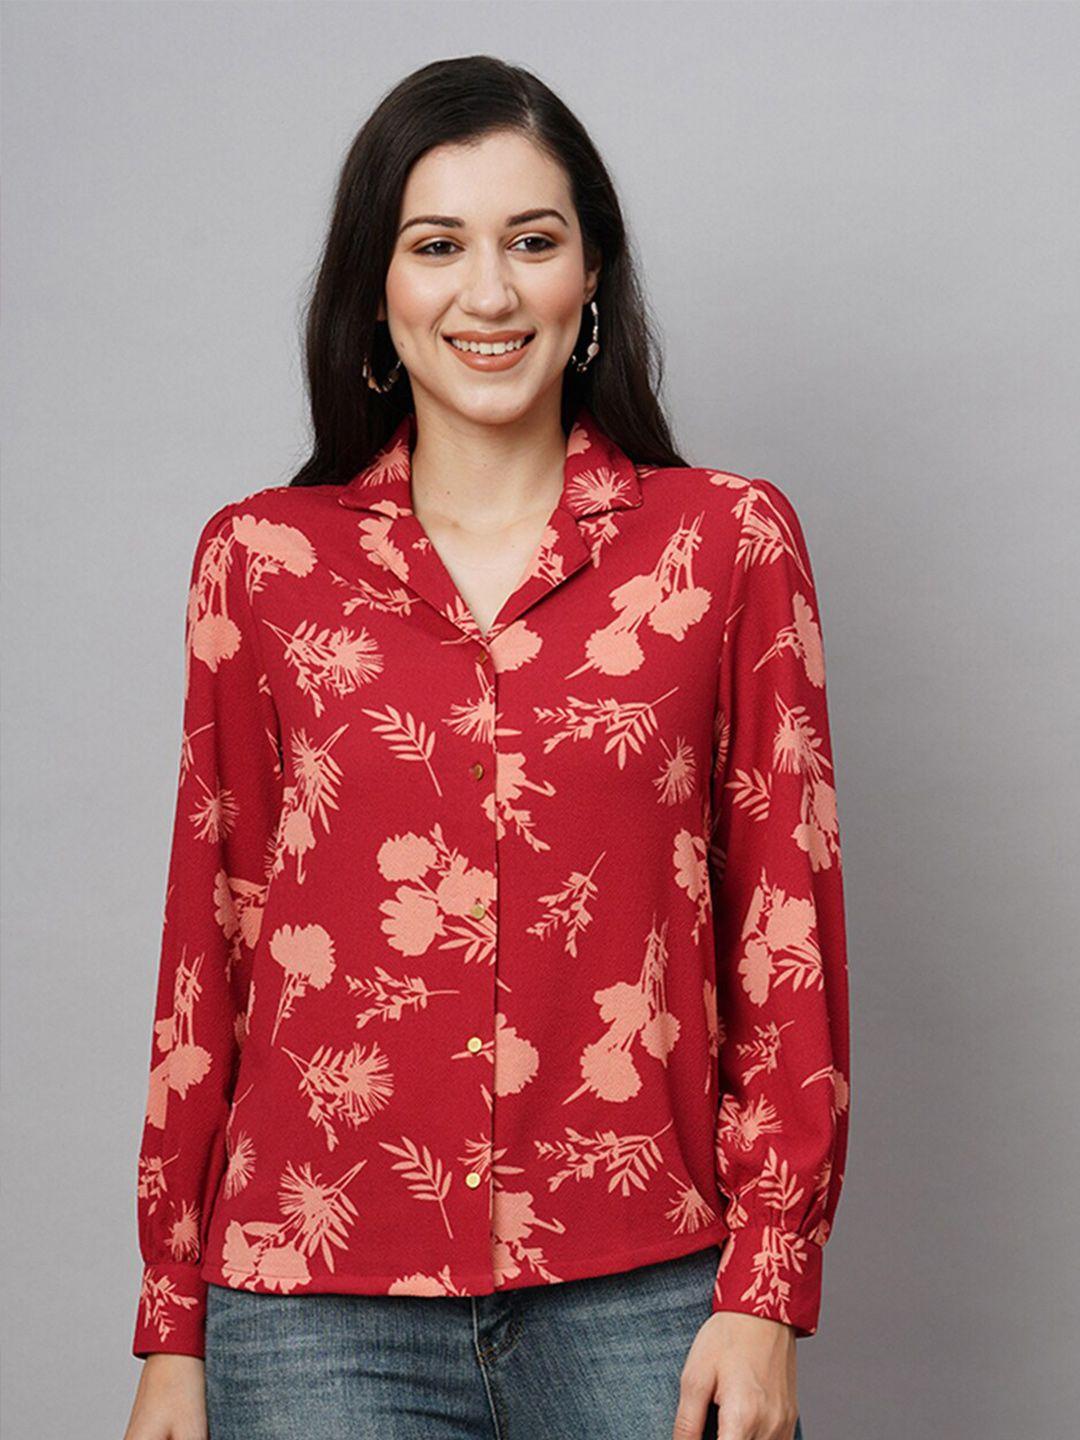 chemistry maroon floral print shirt style top